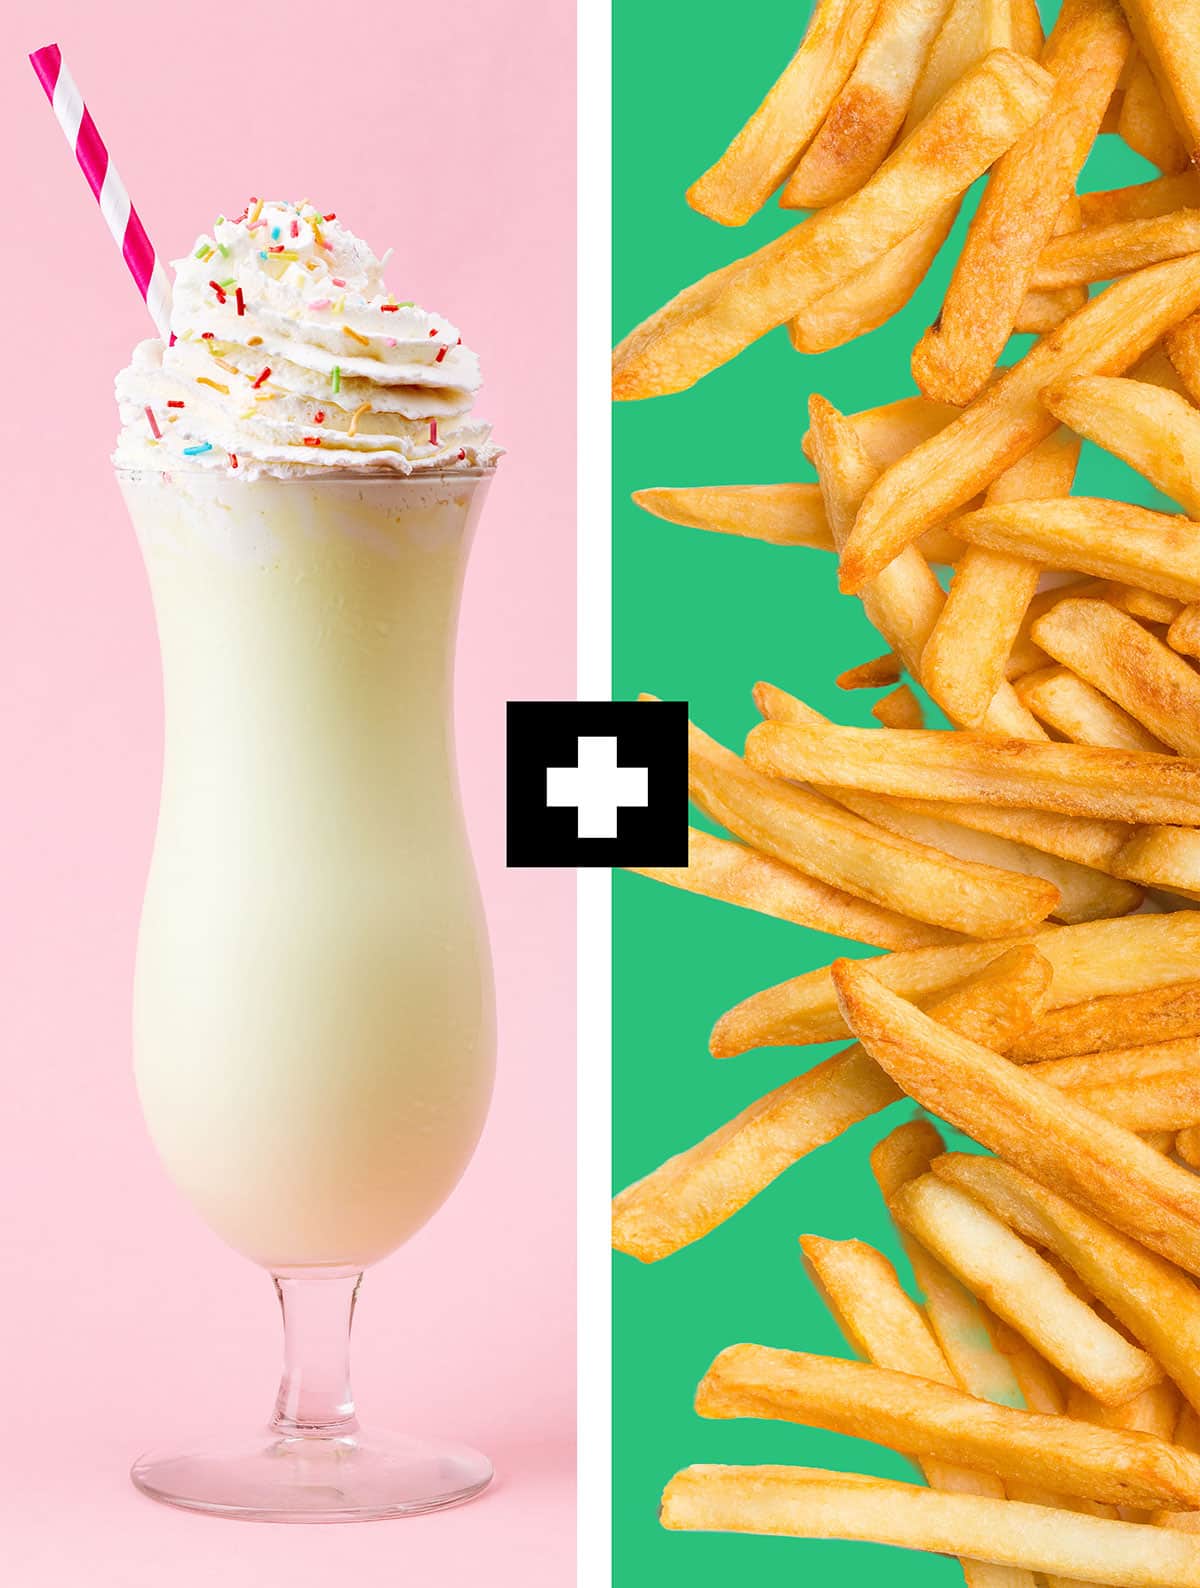 Collage with milkshake next to french fries.